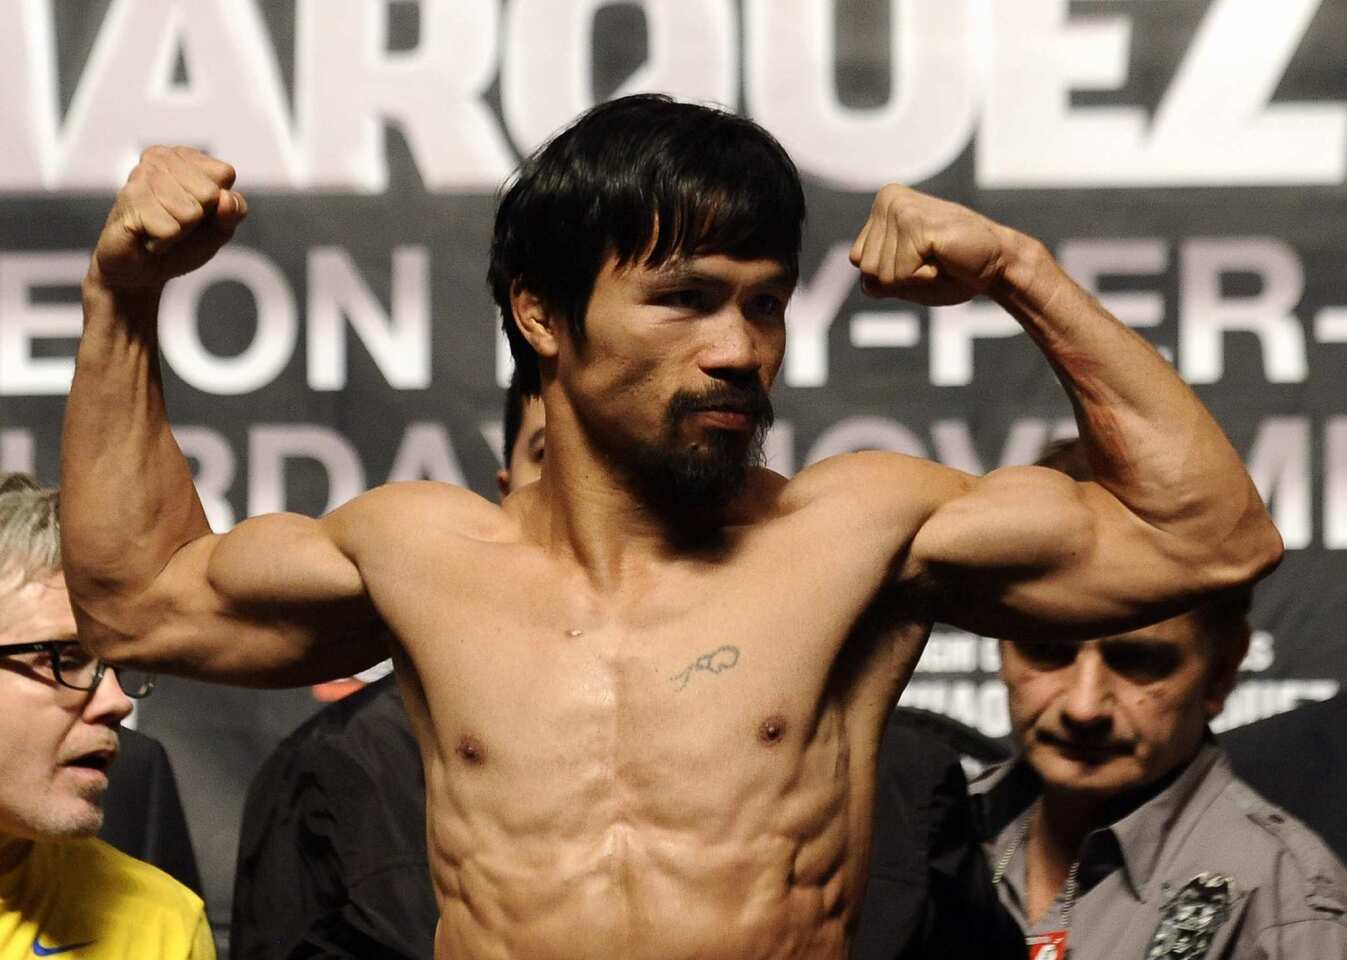 Manny Pacquiao flexes his muscles after weighing in at 143 pounds on Friday at the MGM Grand Garden Arena in Las Vegas. Pacquiao will fight Juan Manuel Marquez for the third time on Saturday, with the winner taking the WBO welterweight title.